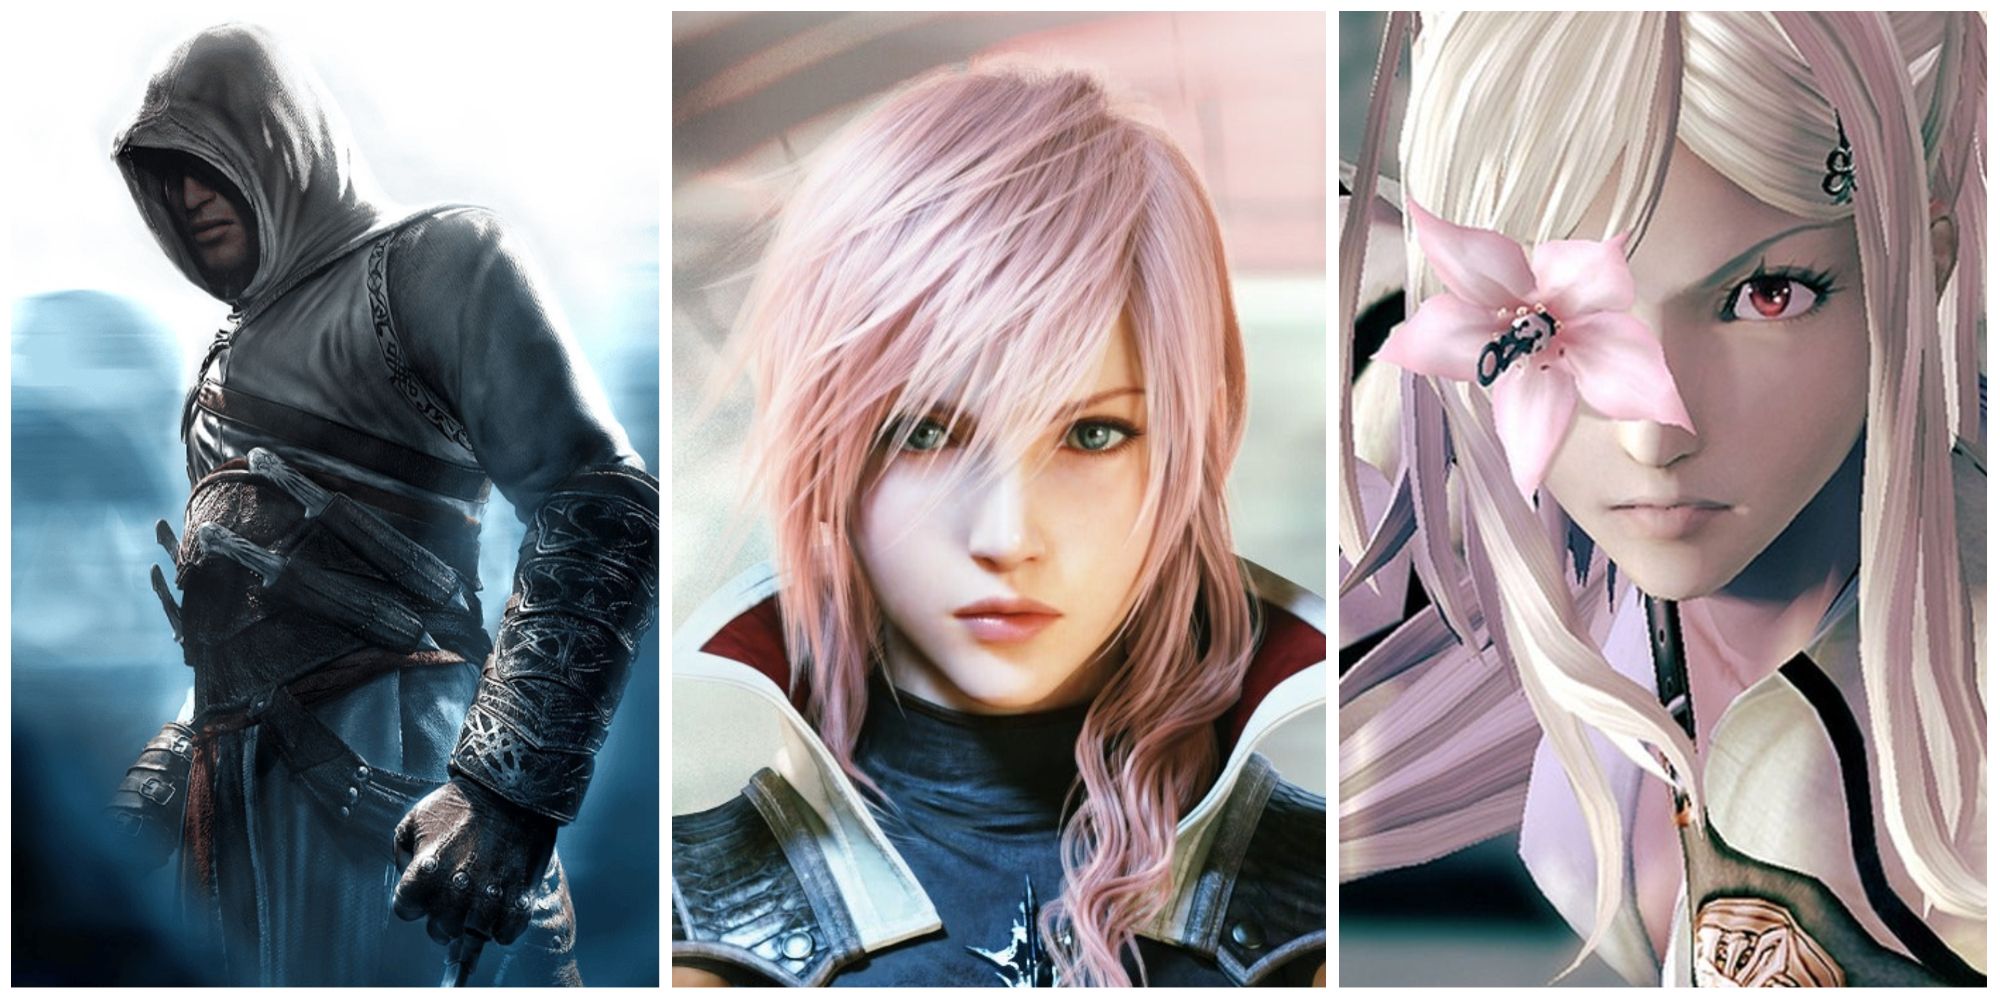 7 Underwhelming Games That Produced Awesome Spin-Offs Assassin's Creed Final Fantasy 13 Drakengard